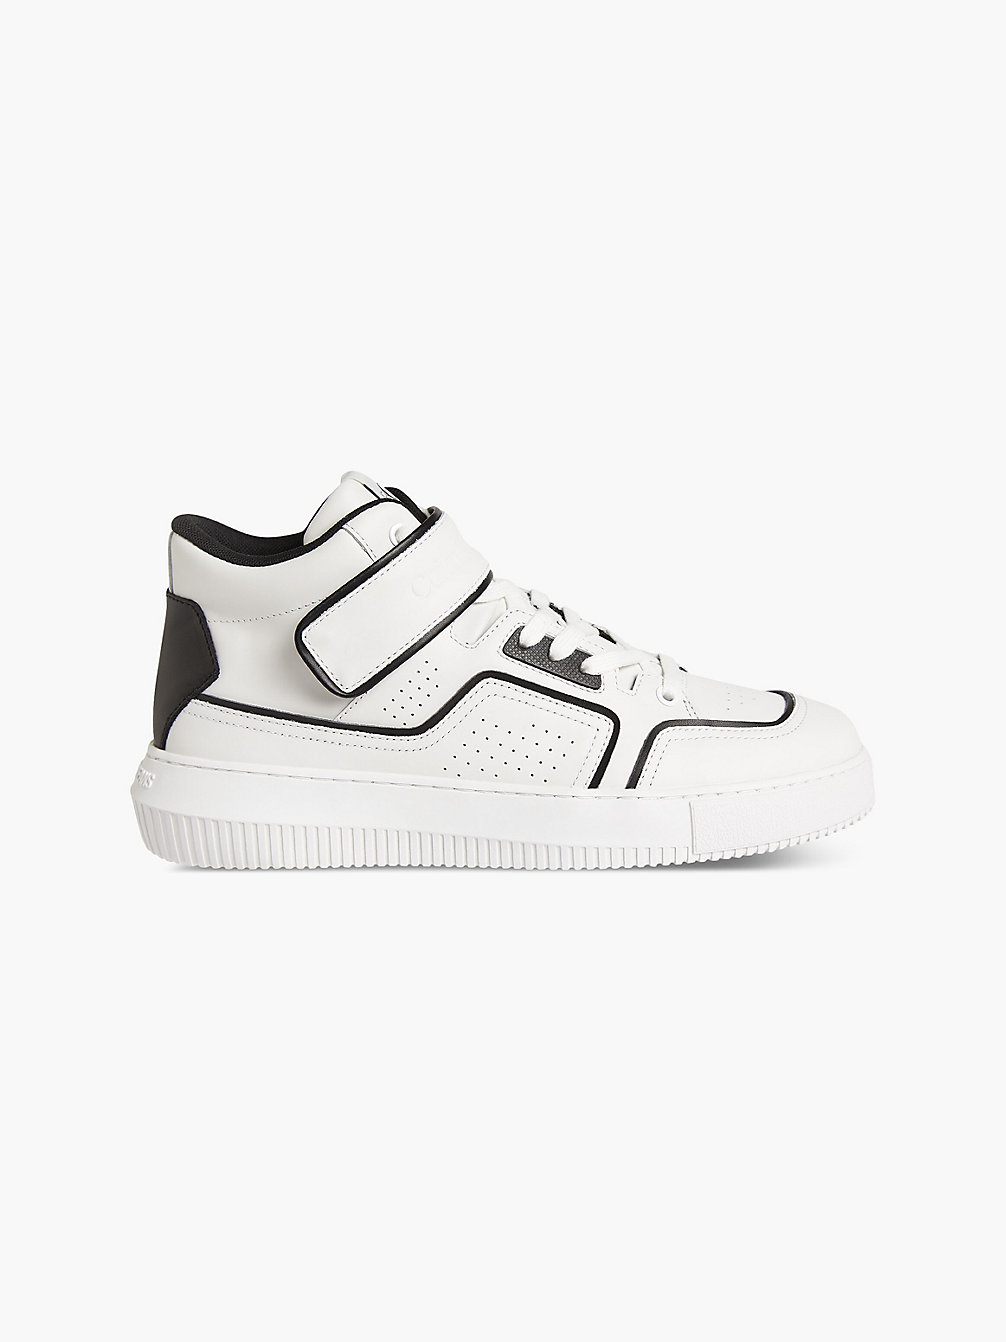 WHITE BLACK Leather High-Top Trainers undefined men Calvin Klein